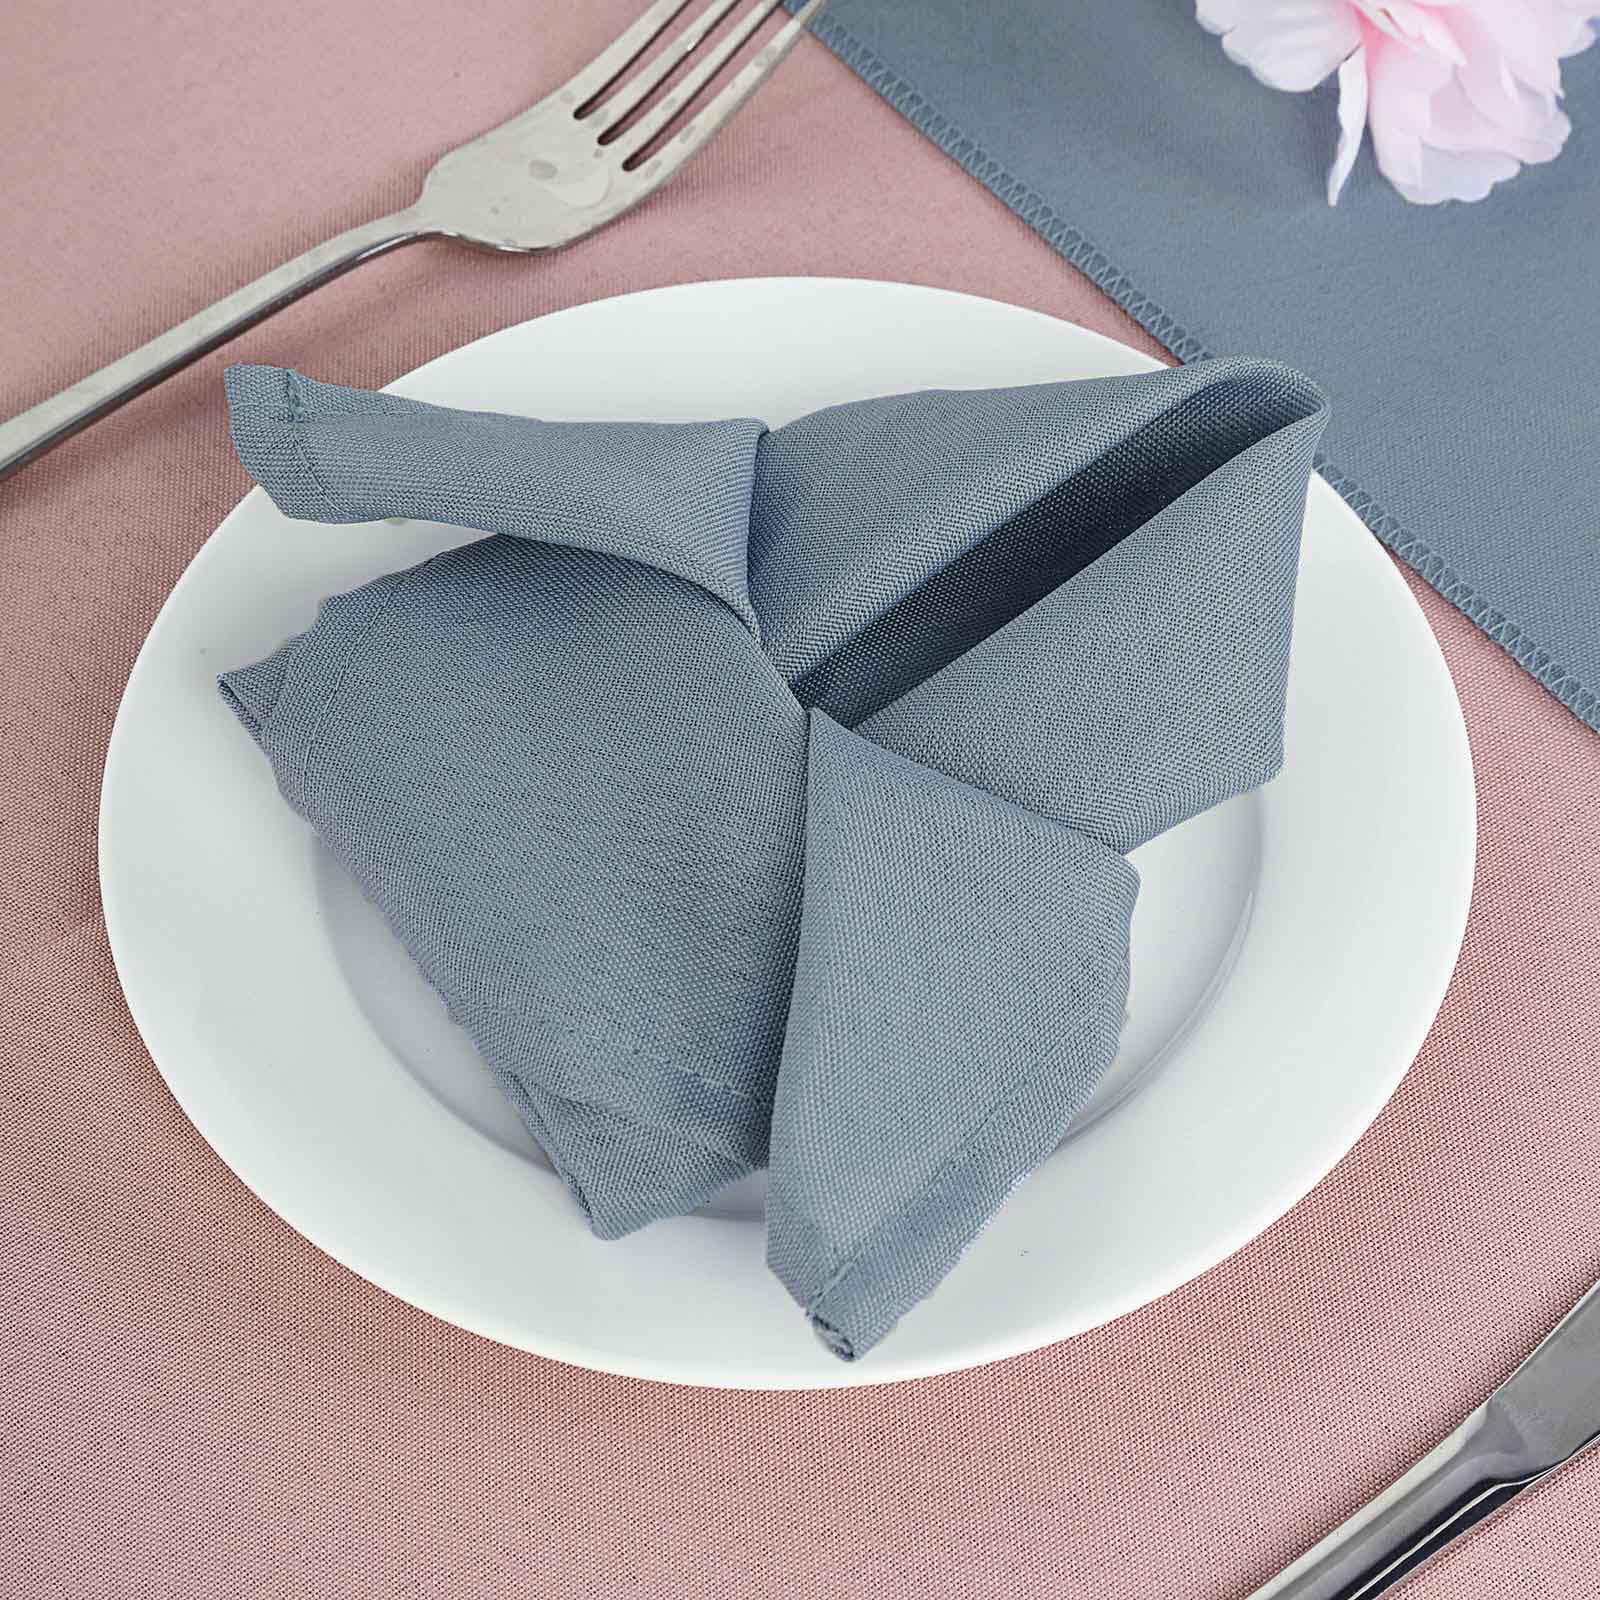 144 white new  home elegance brand wedding dinner cateriing napkins 20x20 poly 